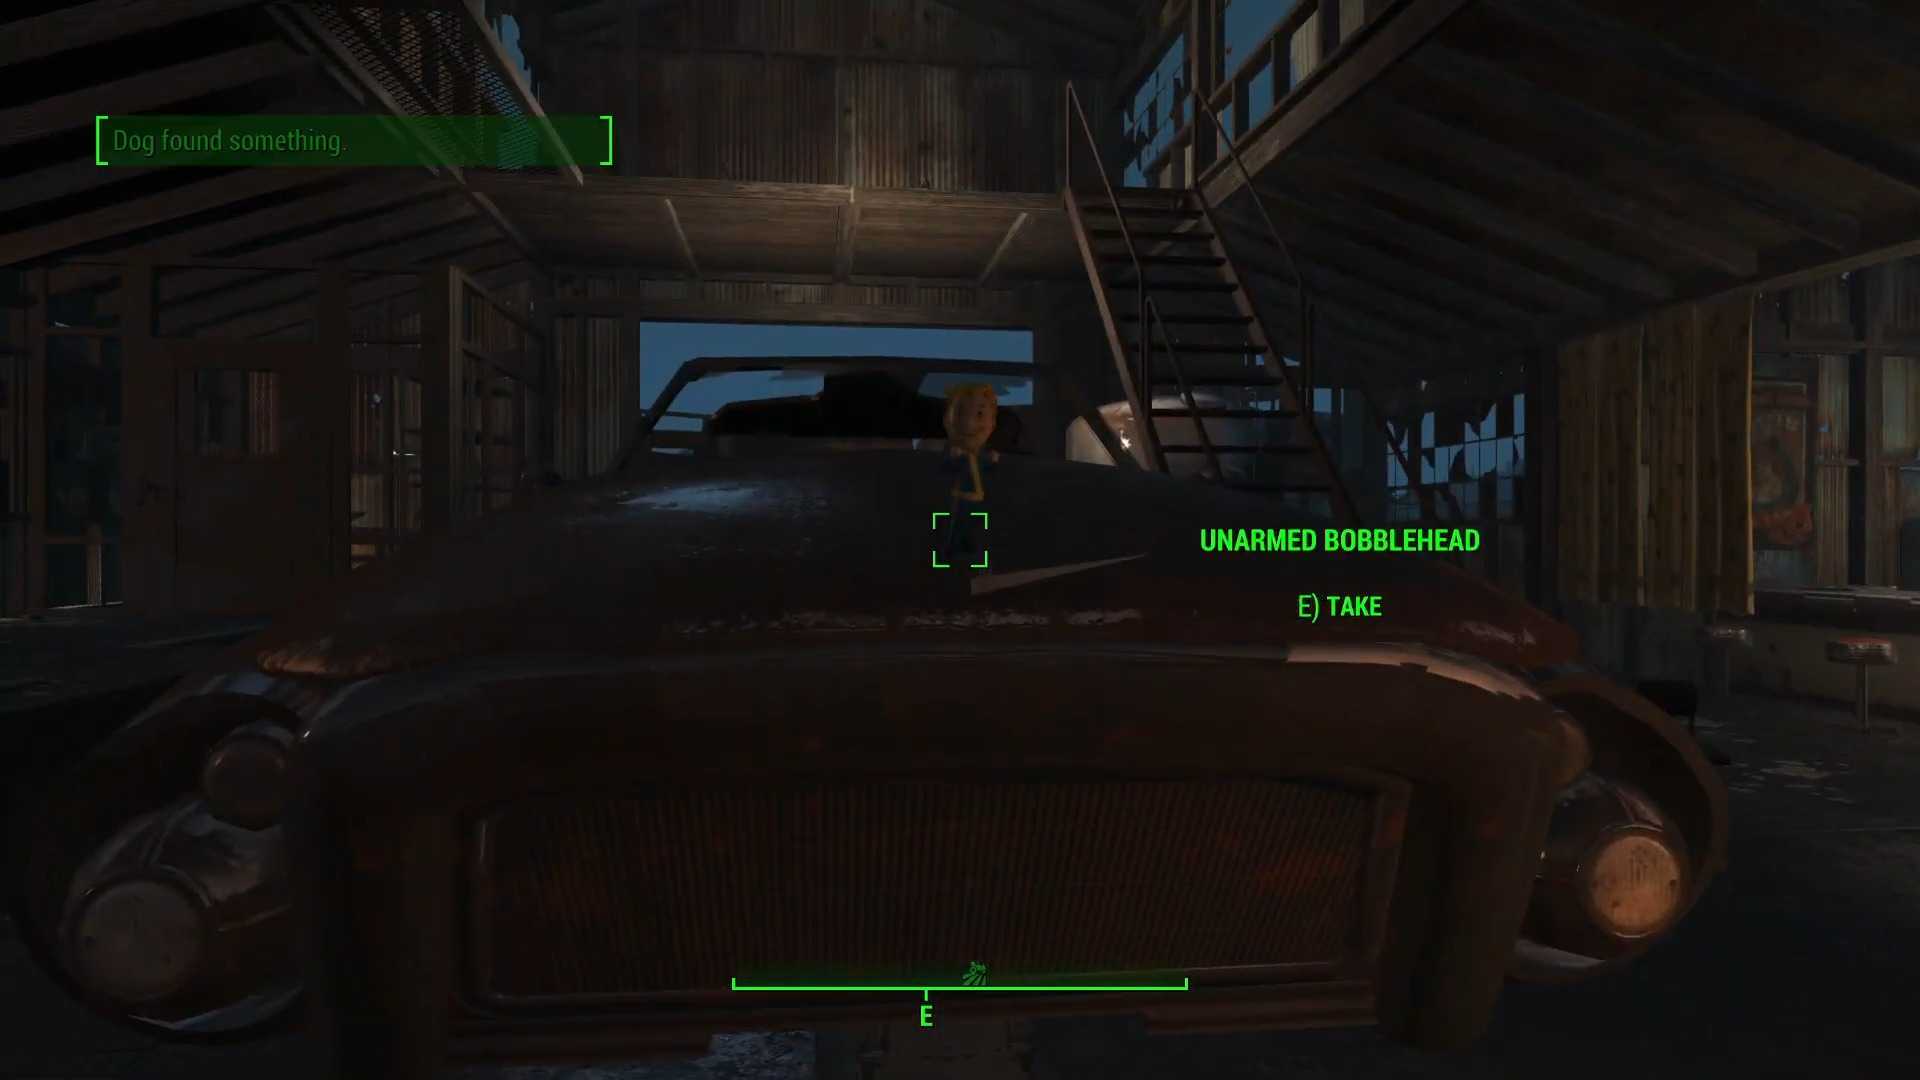 The Unarmed Bobblehead in Fallout 4